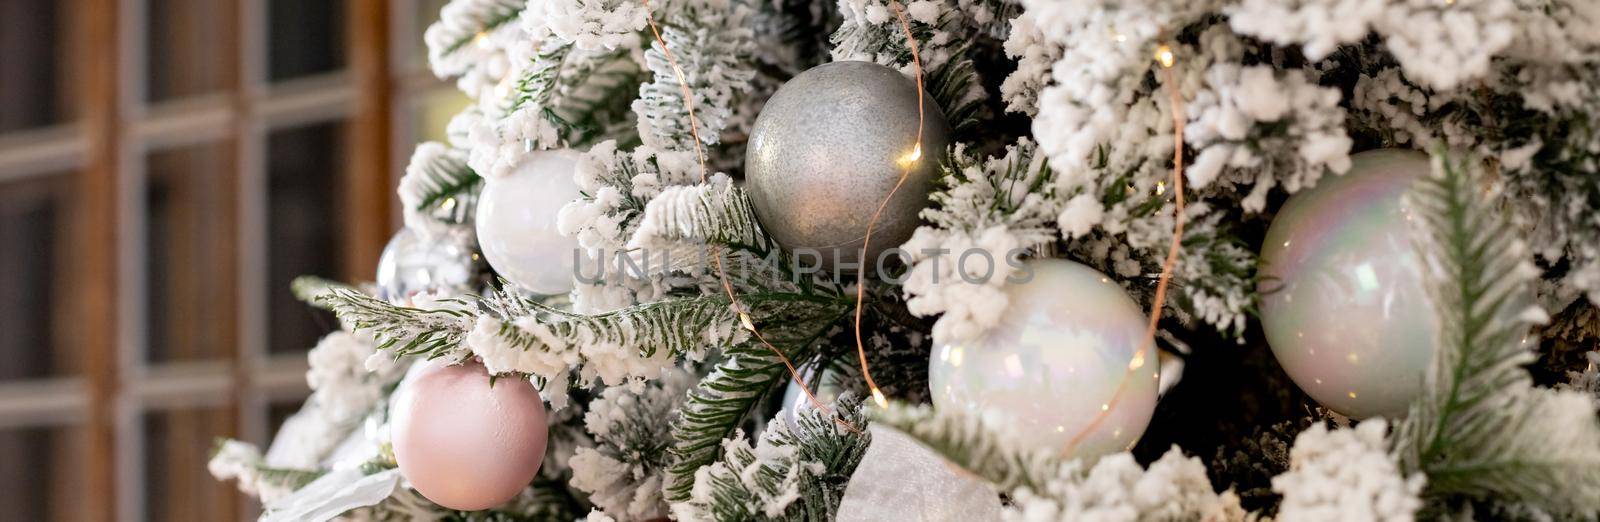 white delicate Christmas tree and Christmas decorations, balls and ribbons, garland and lights. Pink pearl pearl pastel color.New year greeting card. merry Christmas by YuliaYaspe1979